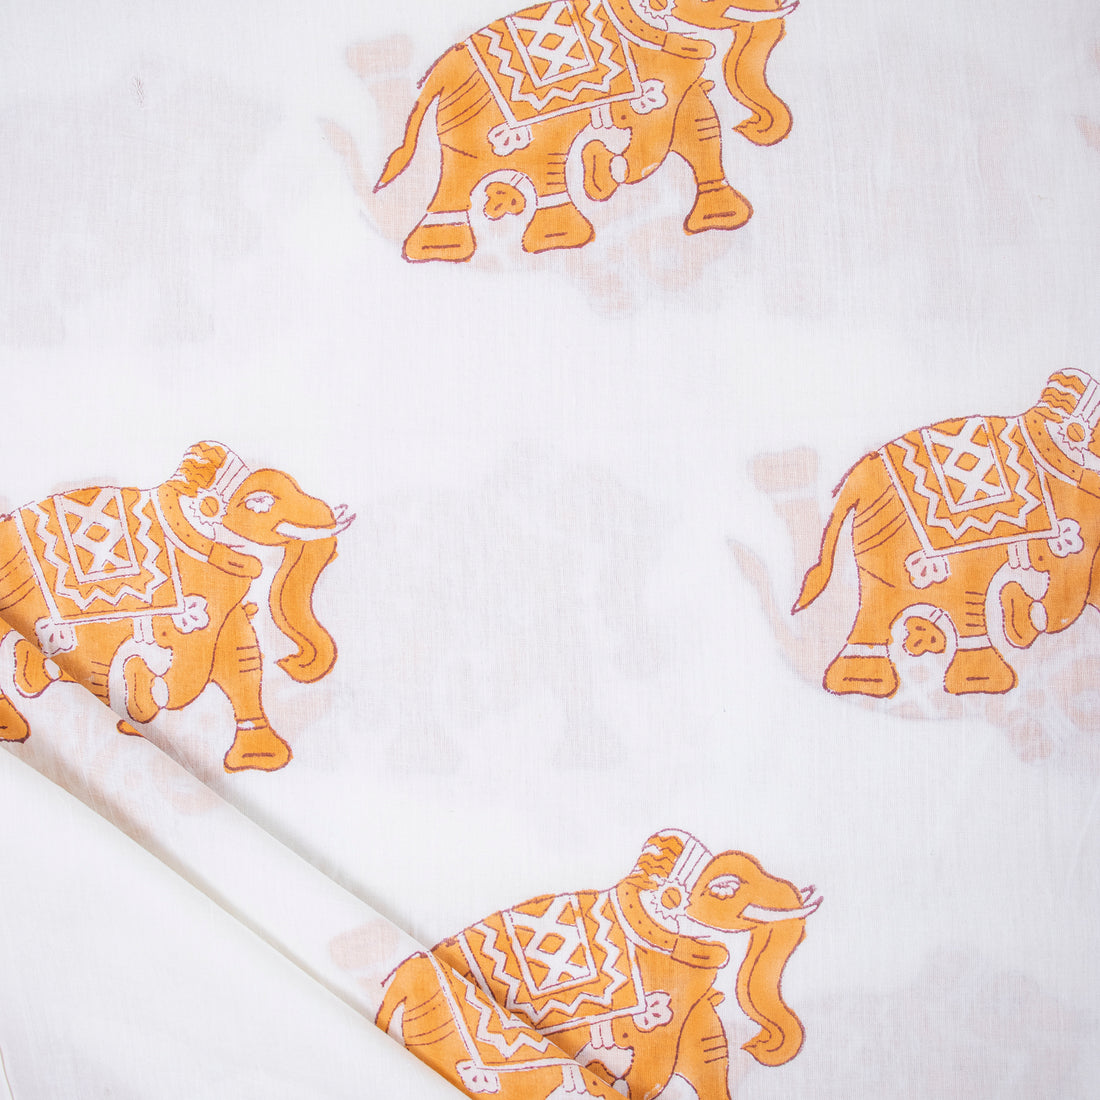 Yellow Elephant Hand Printed Fabric for Dress Material Online